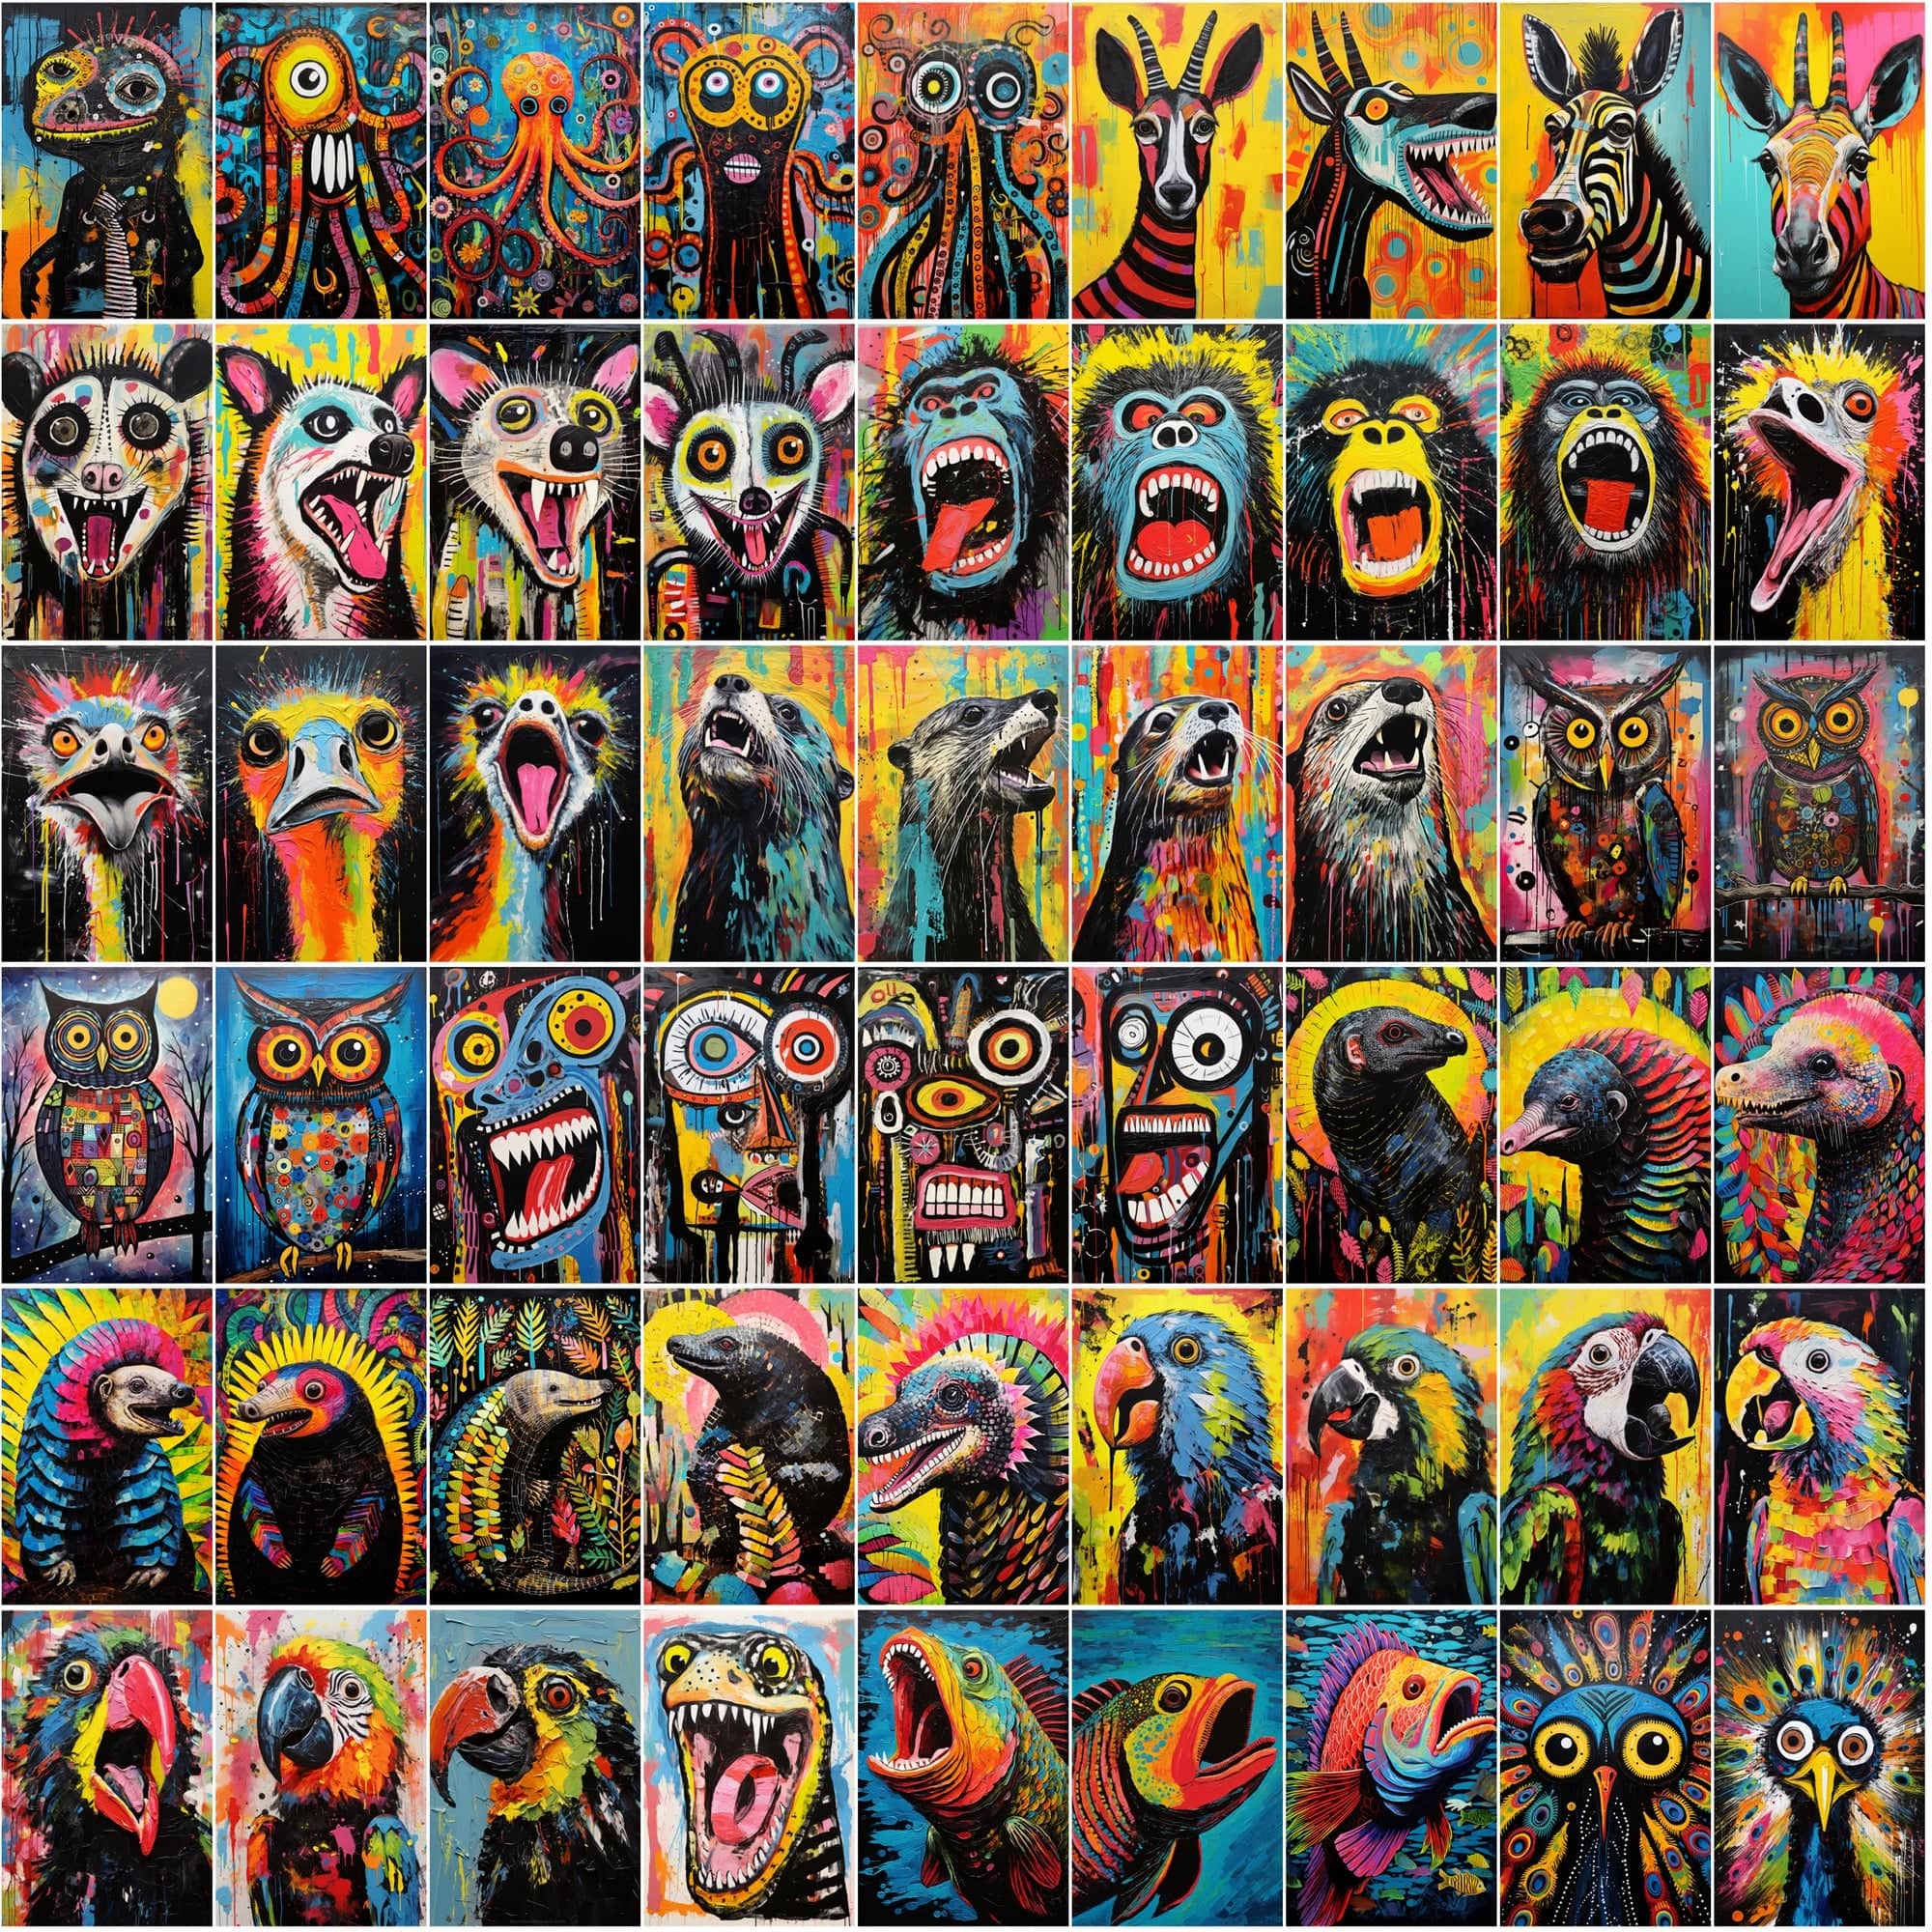 790 Howling Animal Images: Textured, High-Res Art Collection Digital Download Sumobundle